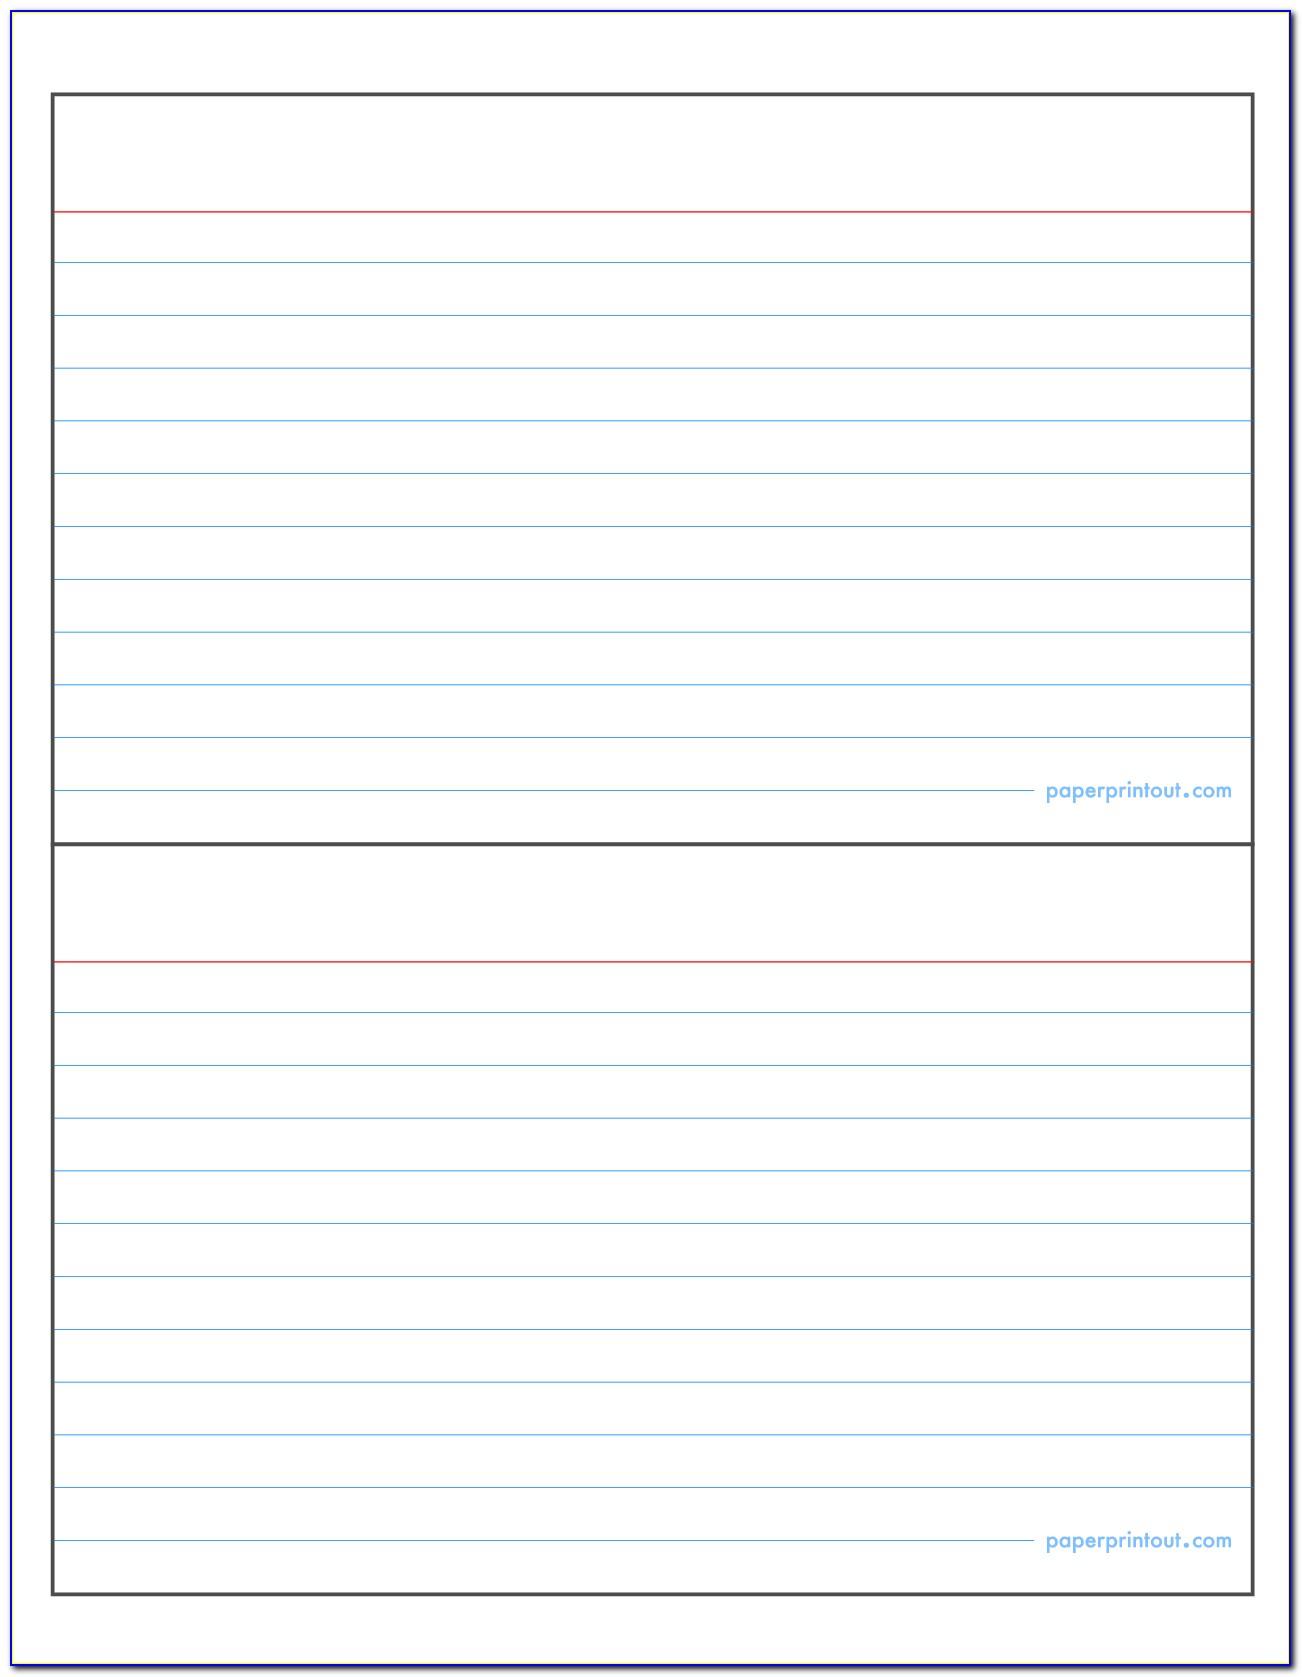 3x5 Index Card Template Word 2016